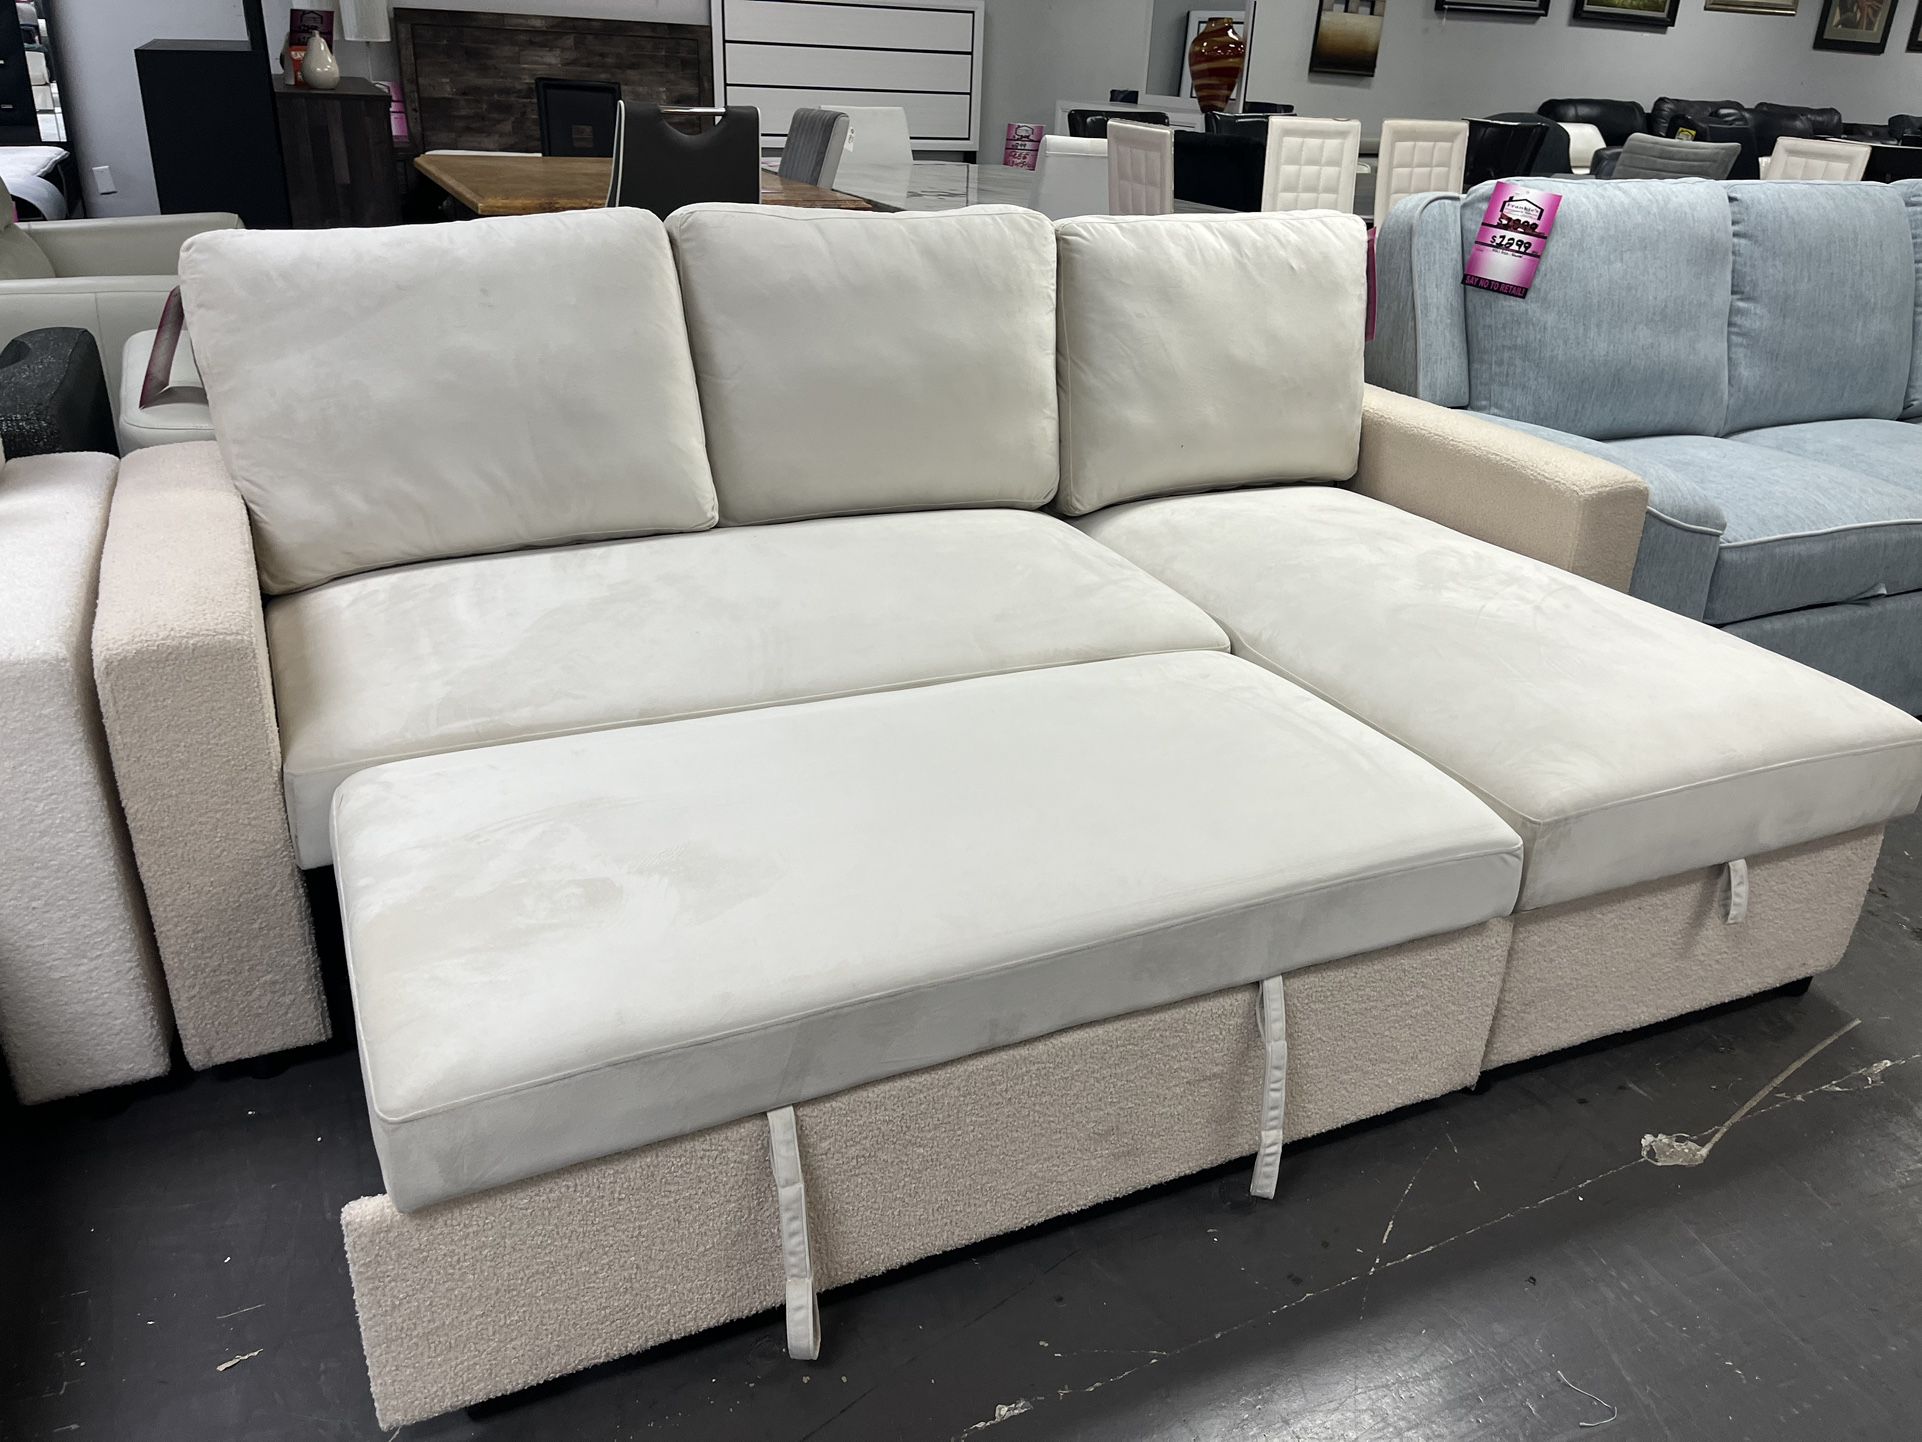 SLEEPER SECTIONAL ON MASSIVE CLEARANCE STORE CLOSING EVERYTHING MUST GO !!!**** OFFER ENDS 05/31!!**